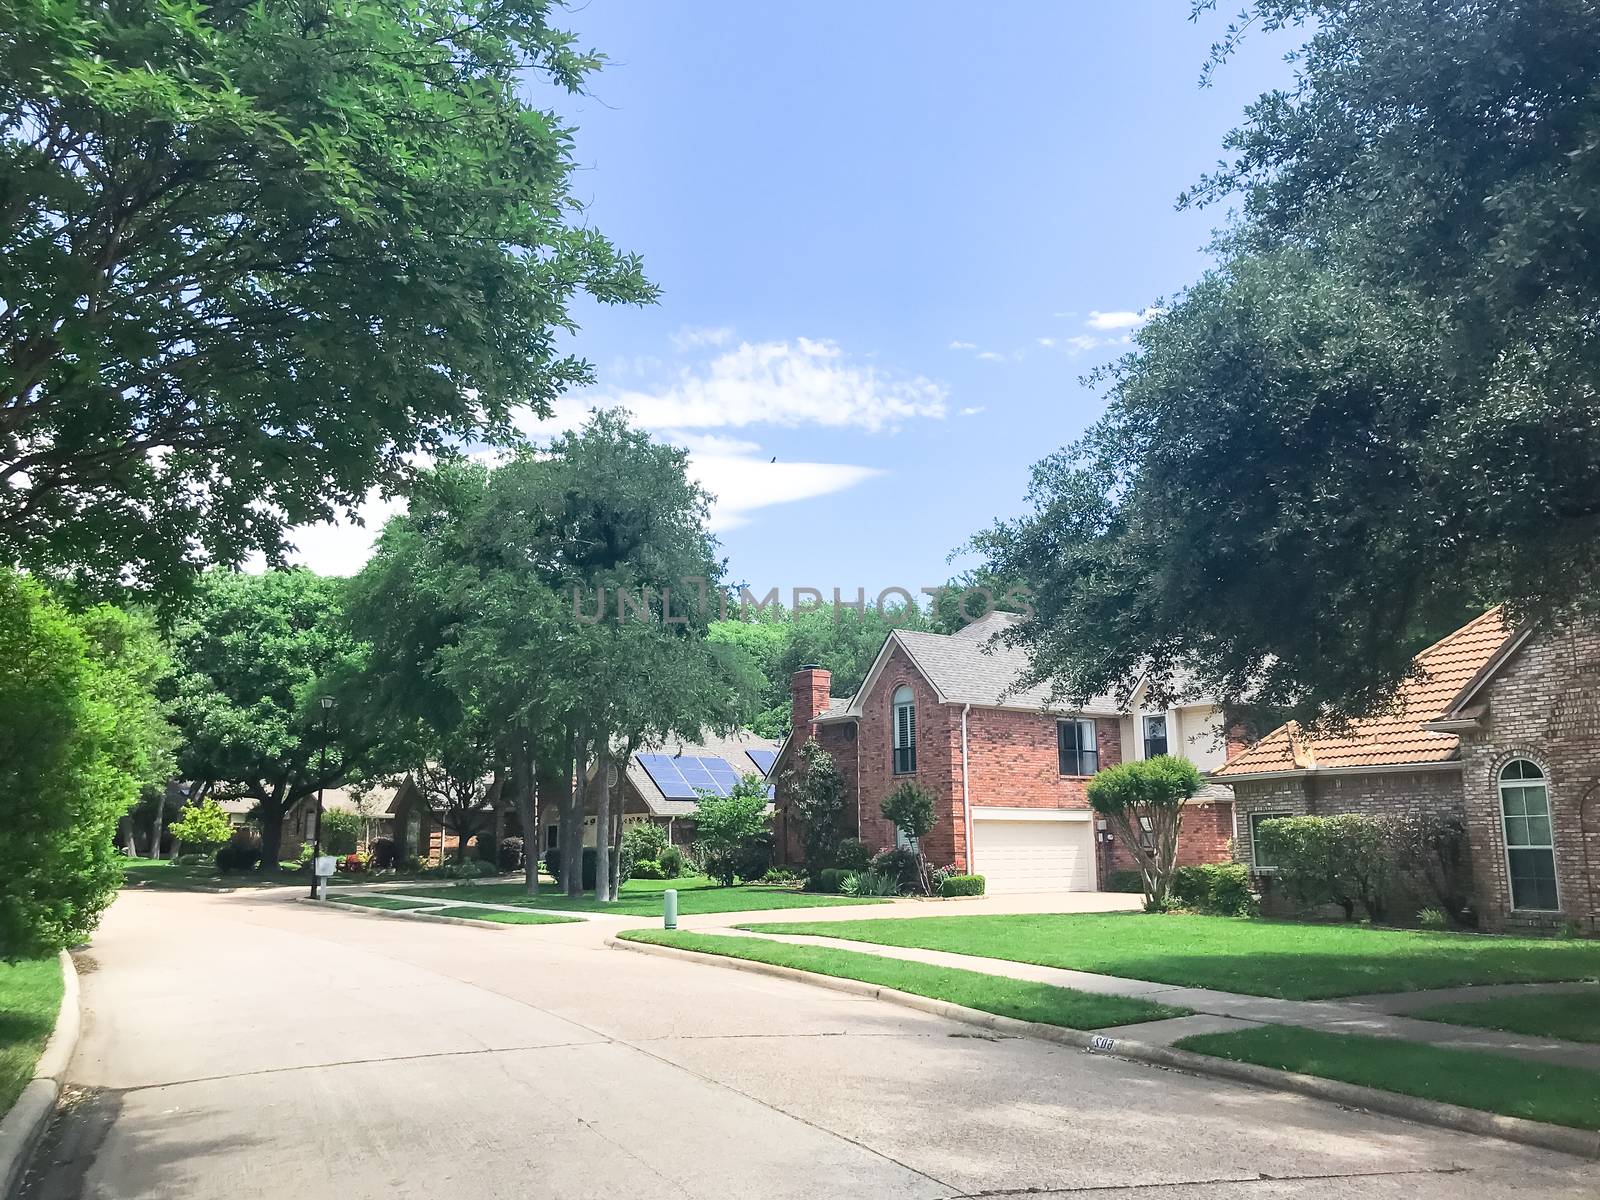 Clean and green residential street with row of upscale house and solar panel roof surrounded by tall trees near Dallas, Texas, USA by trongnguyen